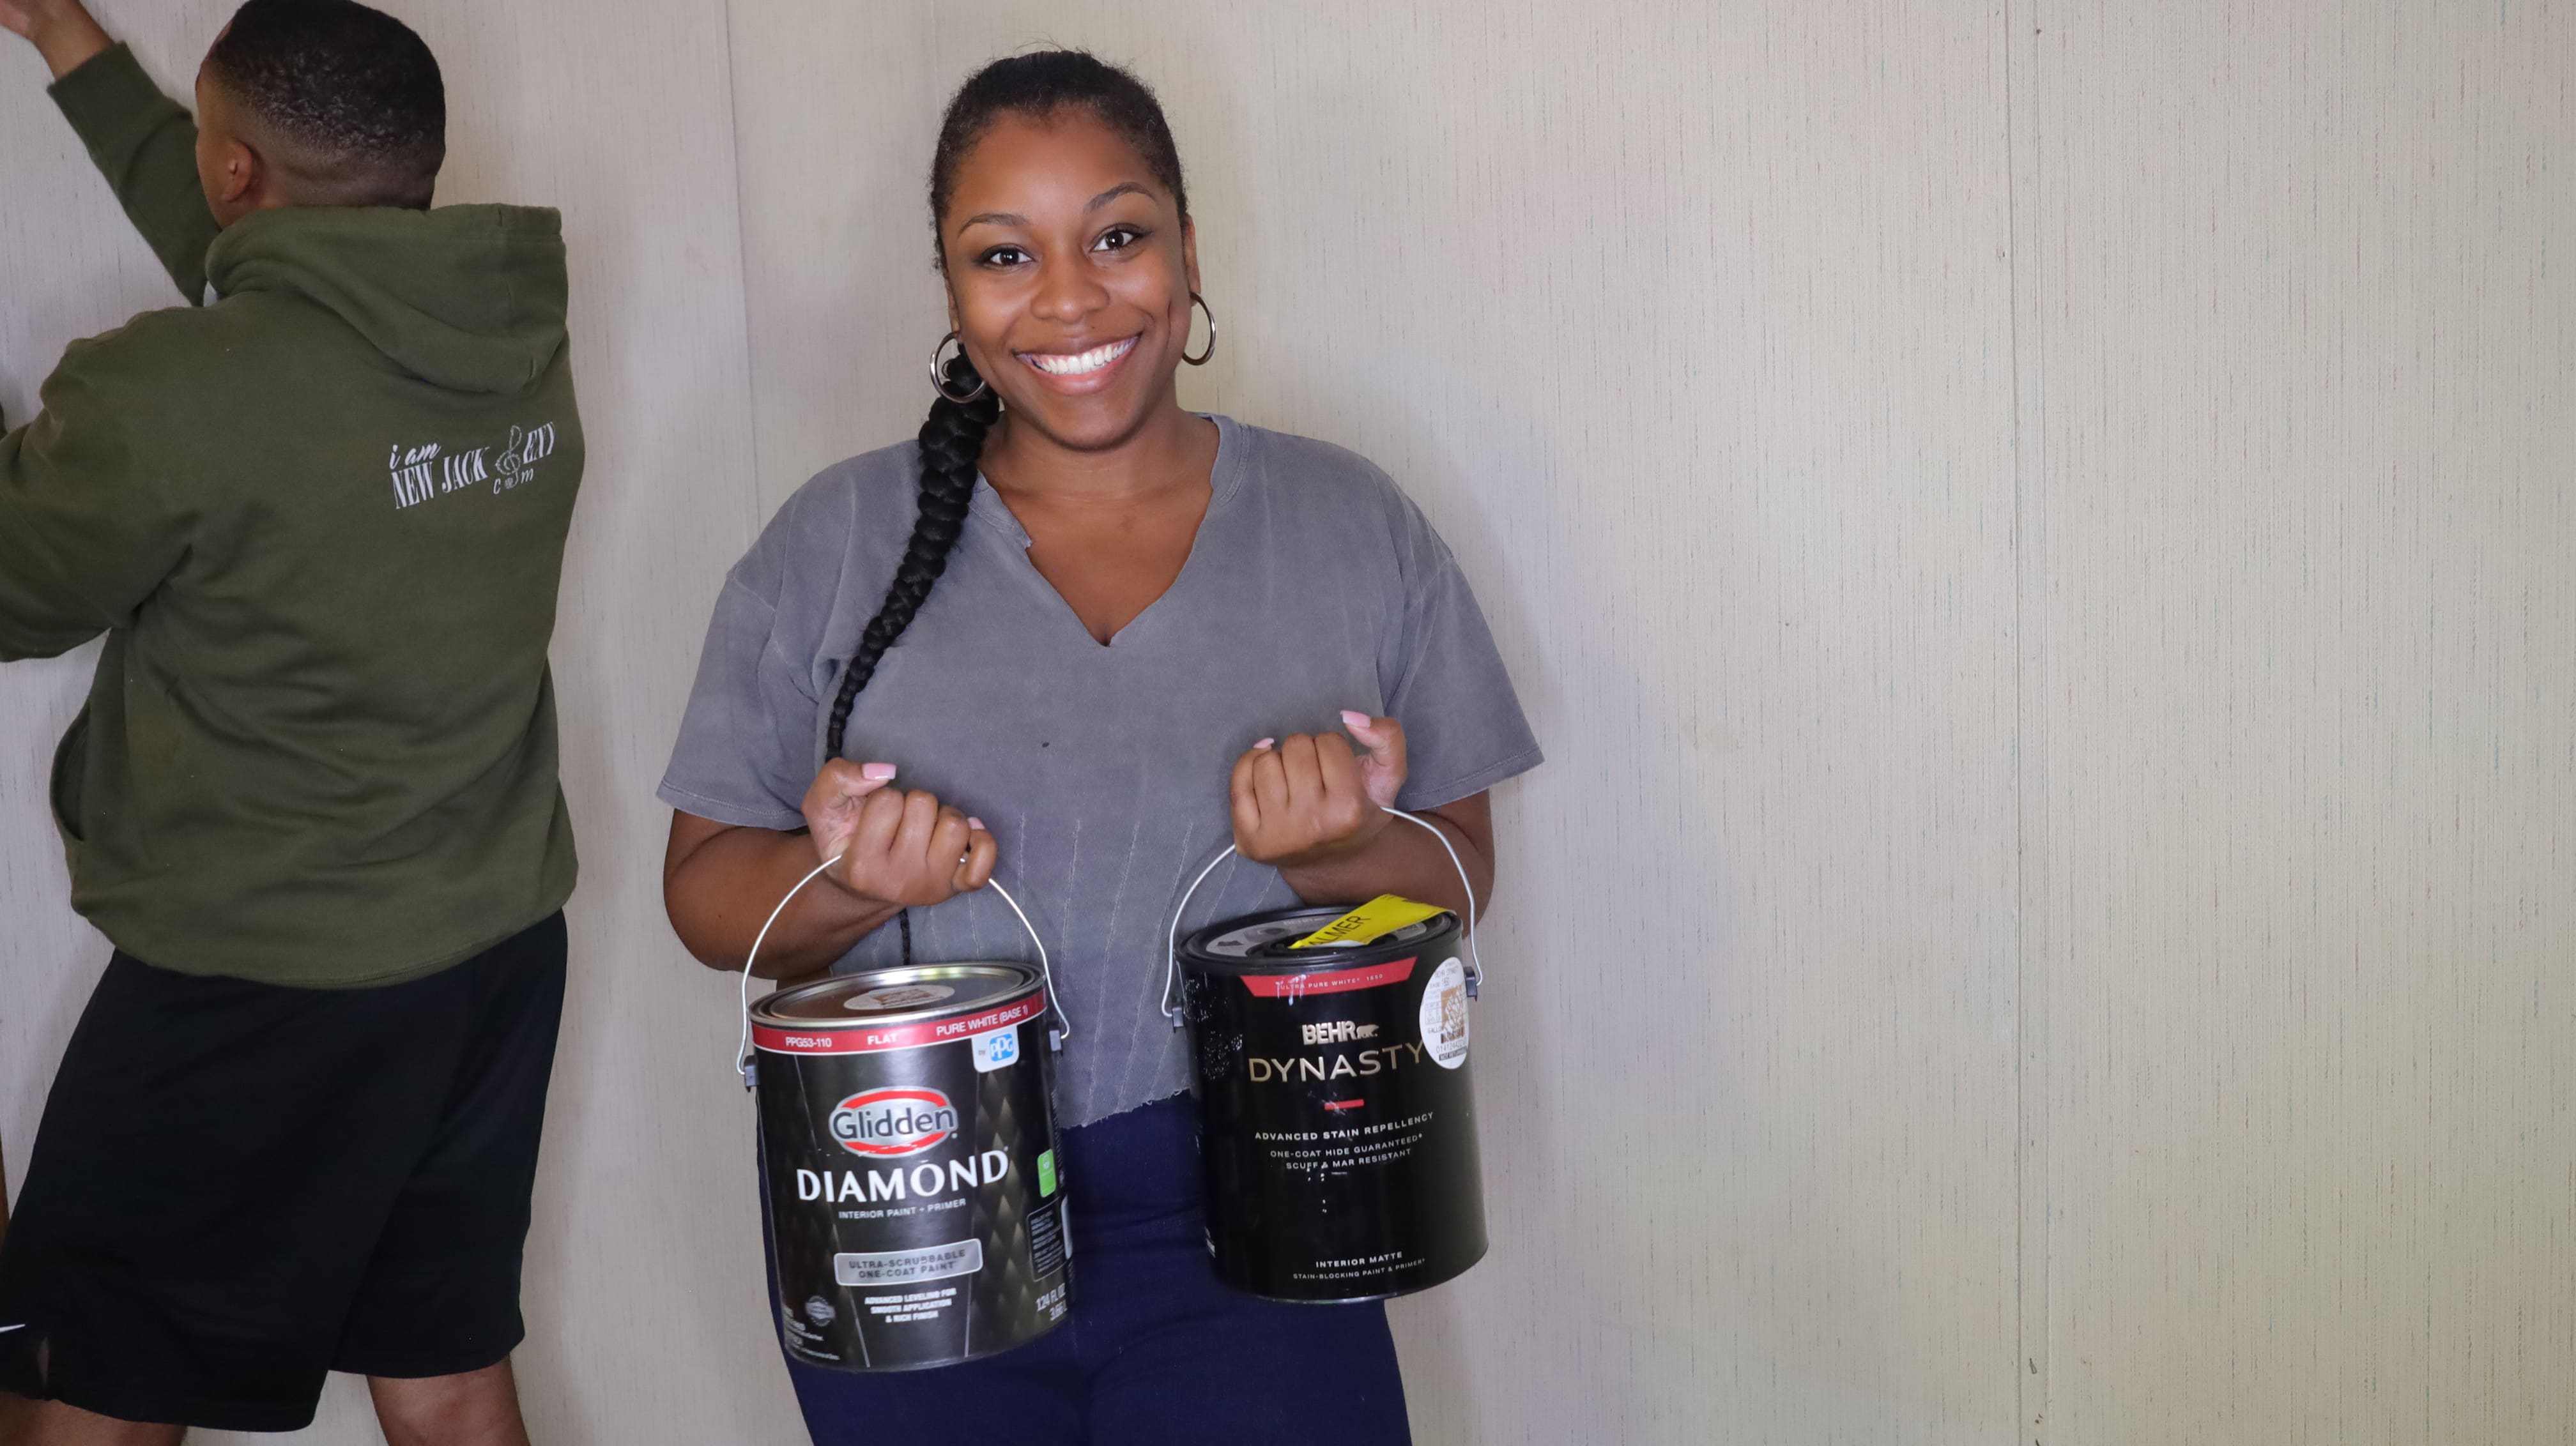 A woman holding two paint cans.